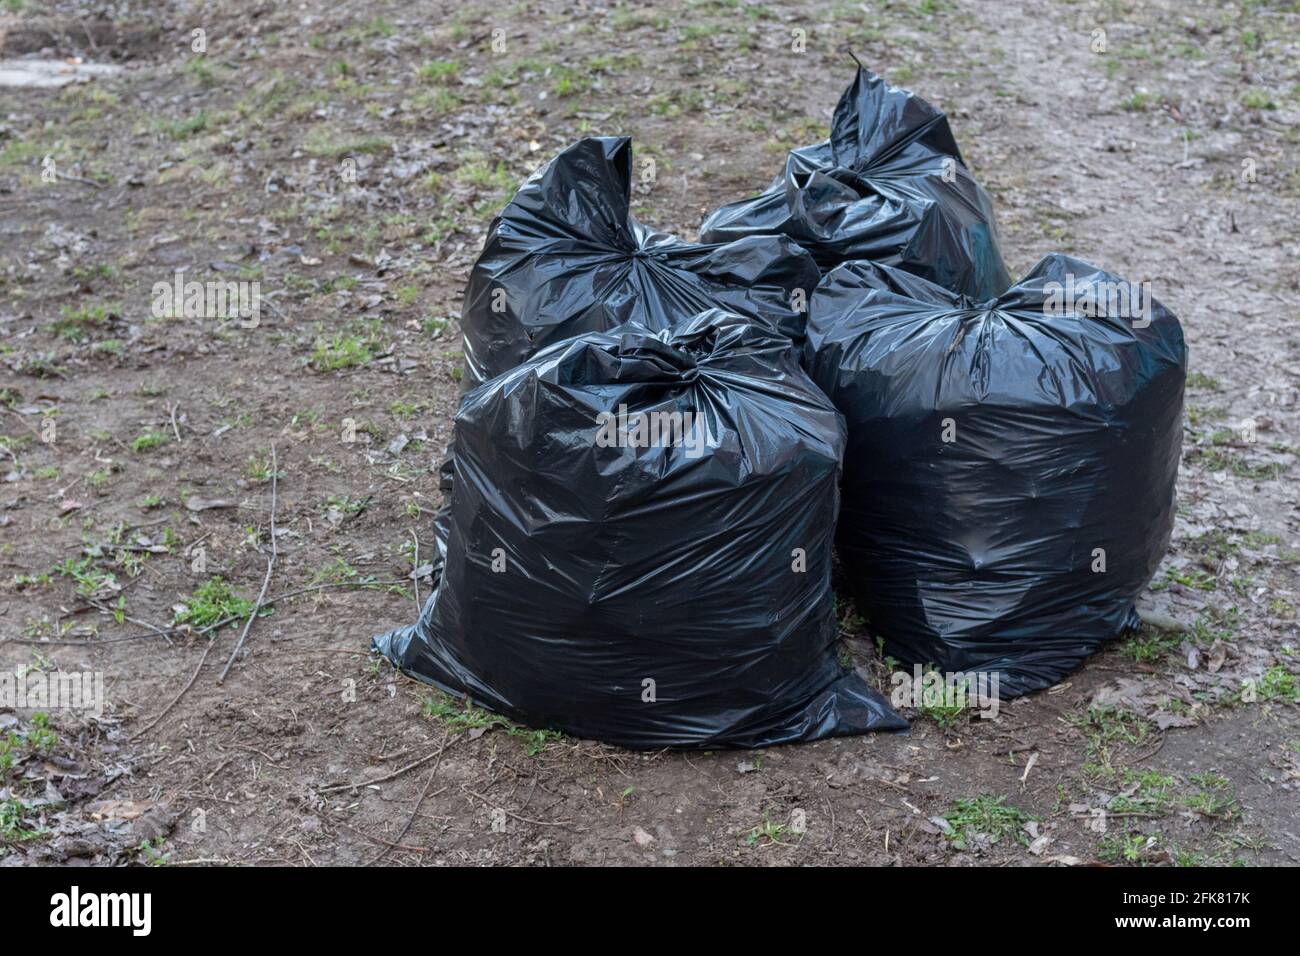 https://c8.alamy.com/comp/2FK817K/several-black-garbage-bags-on-the-ground-to-be-handed-over-to-the-garbage-collection-service-garbage-removal-on-the-city-streets-seasonal-cleaning-o-2FK817K.jpg